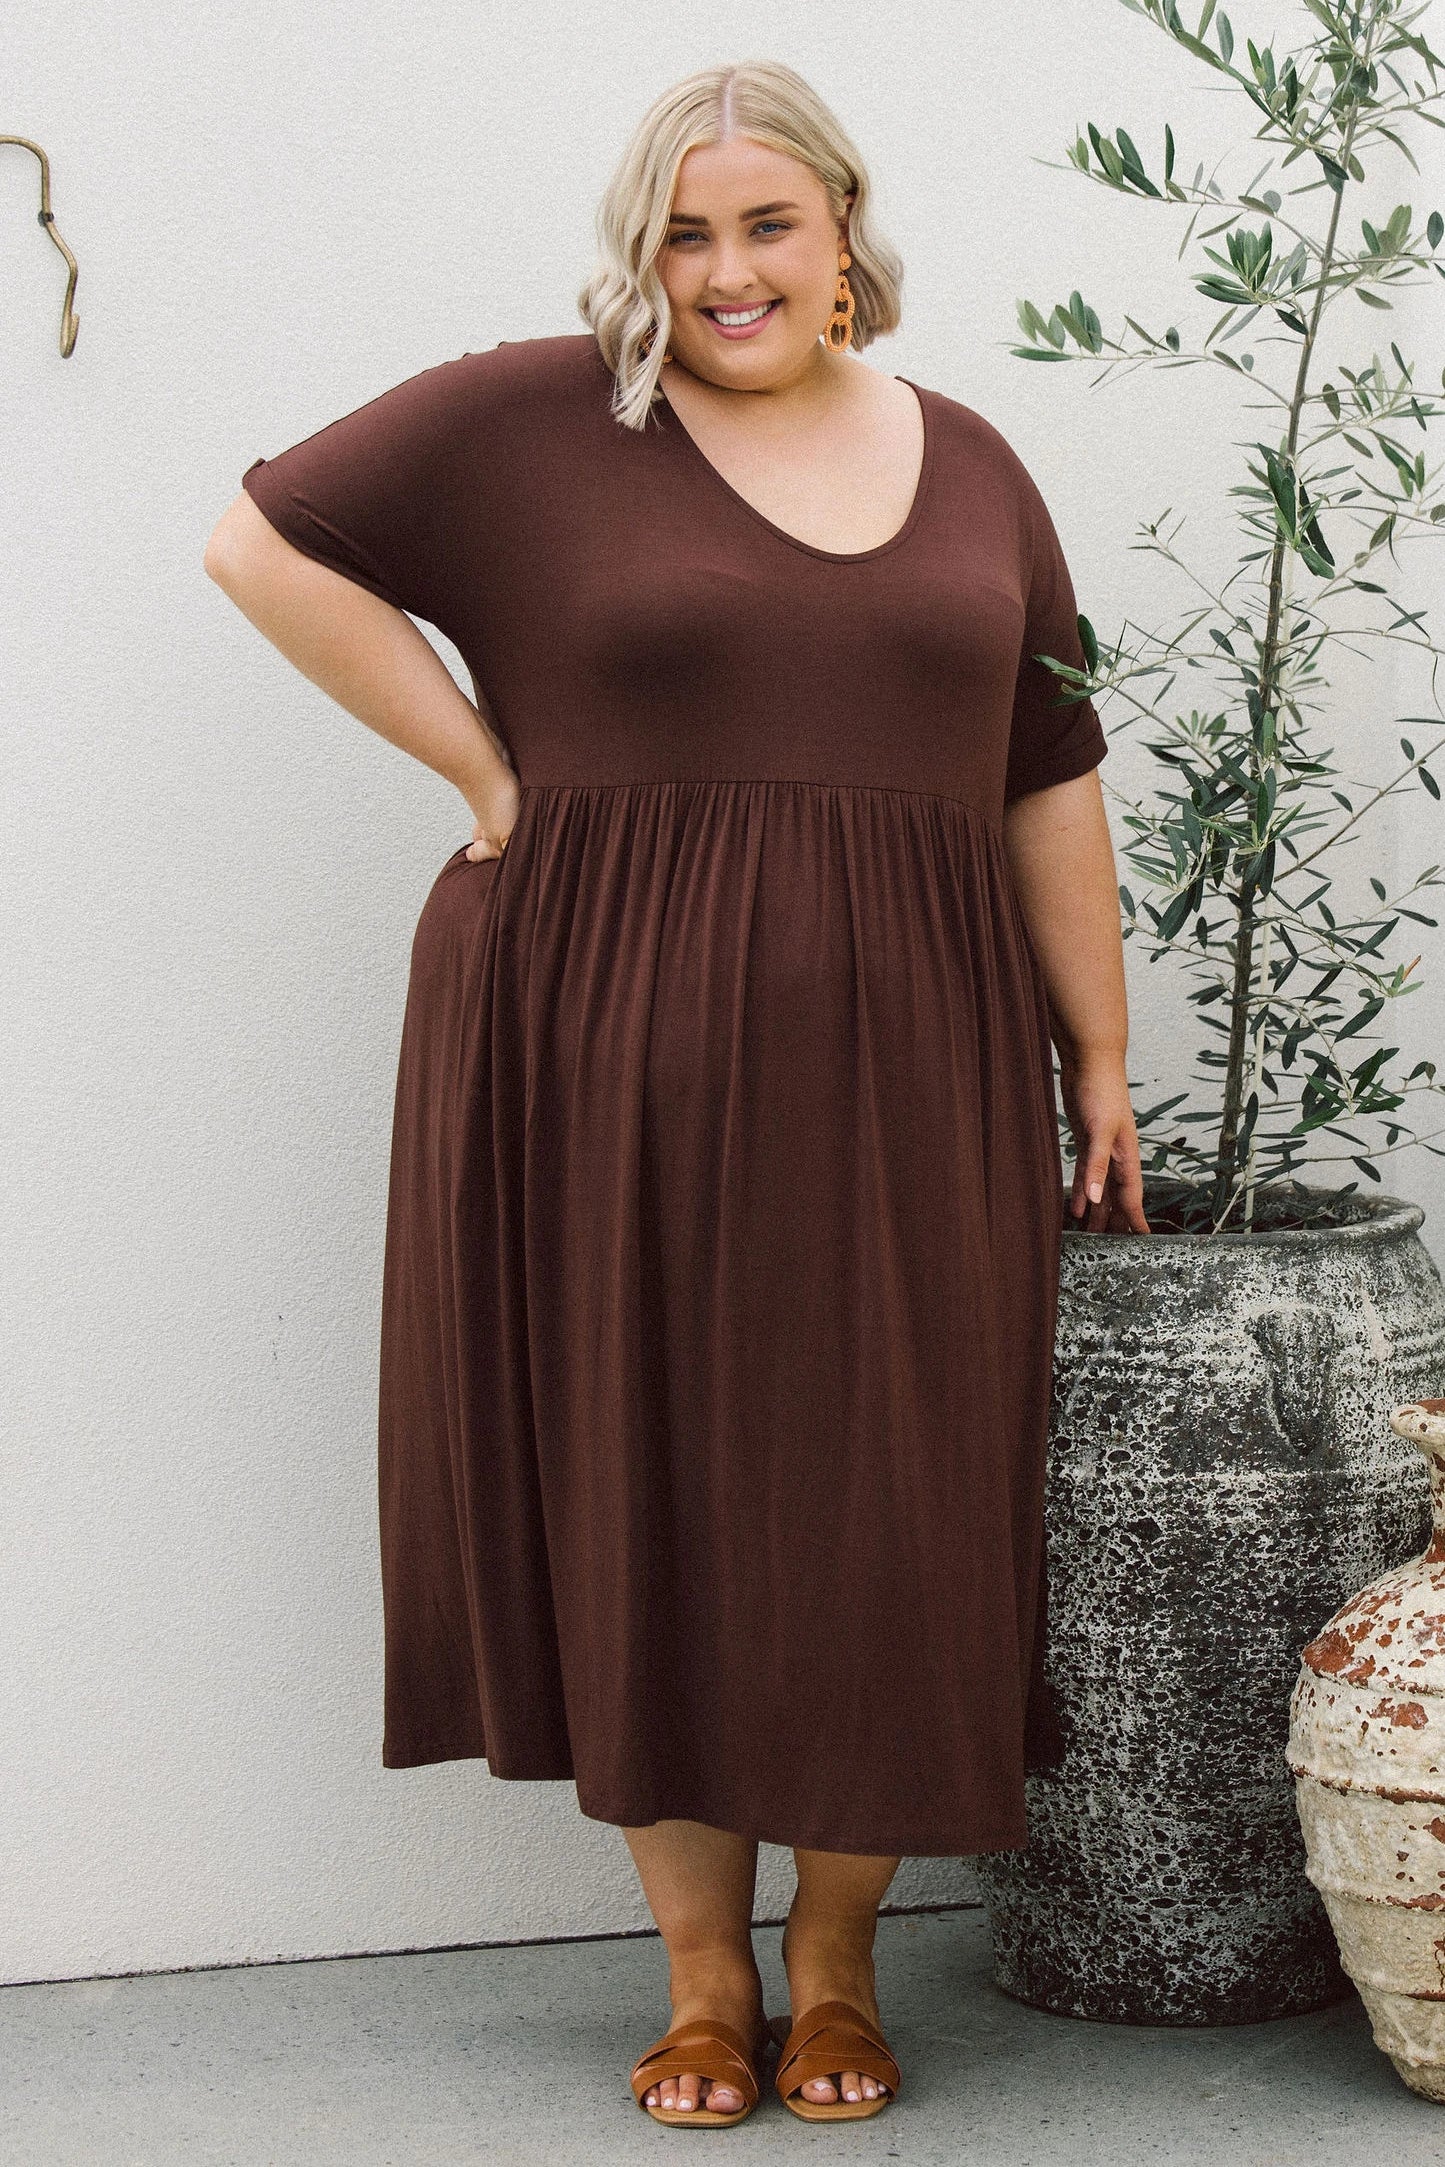 Buy Women's Plus Size Dress Online in Brown. Afterpay Available at ...